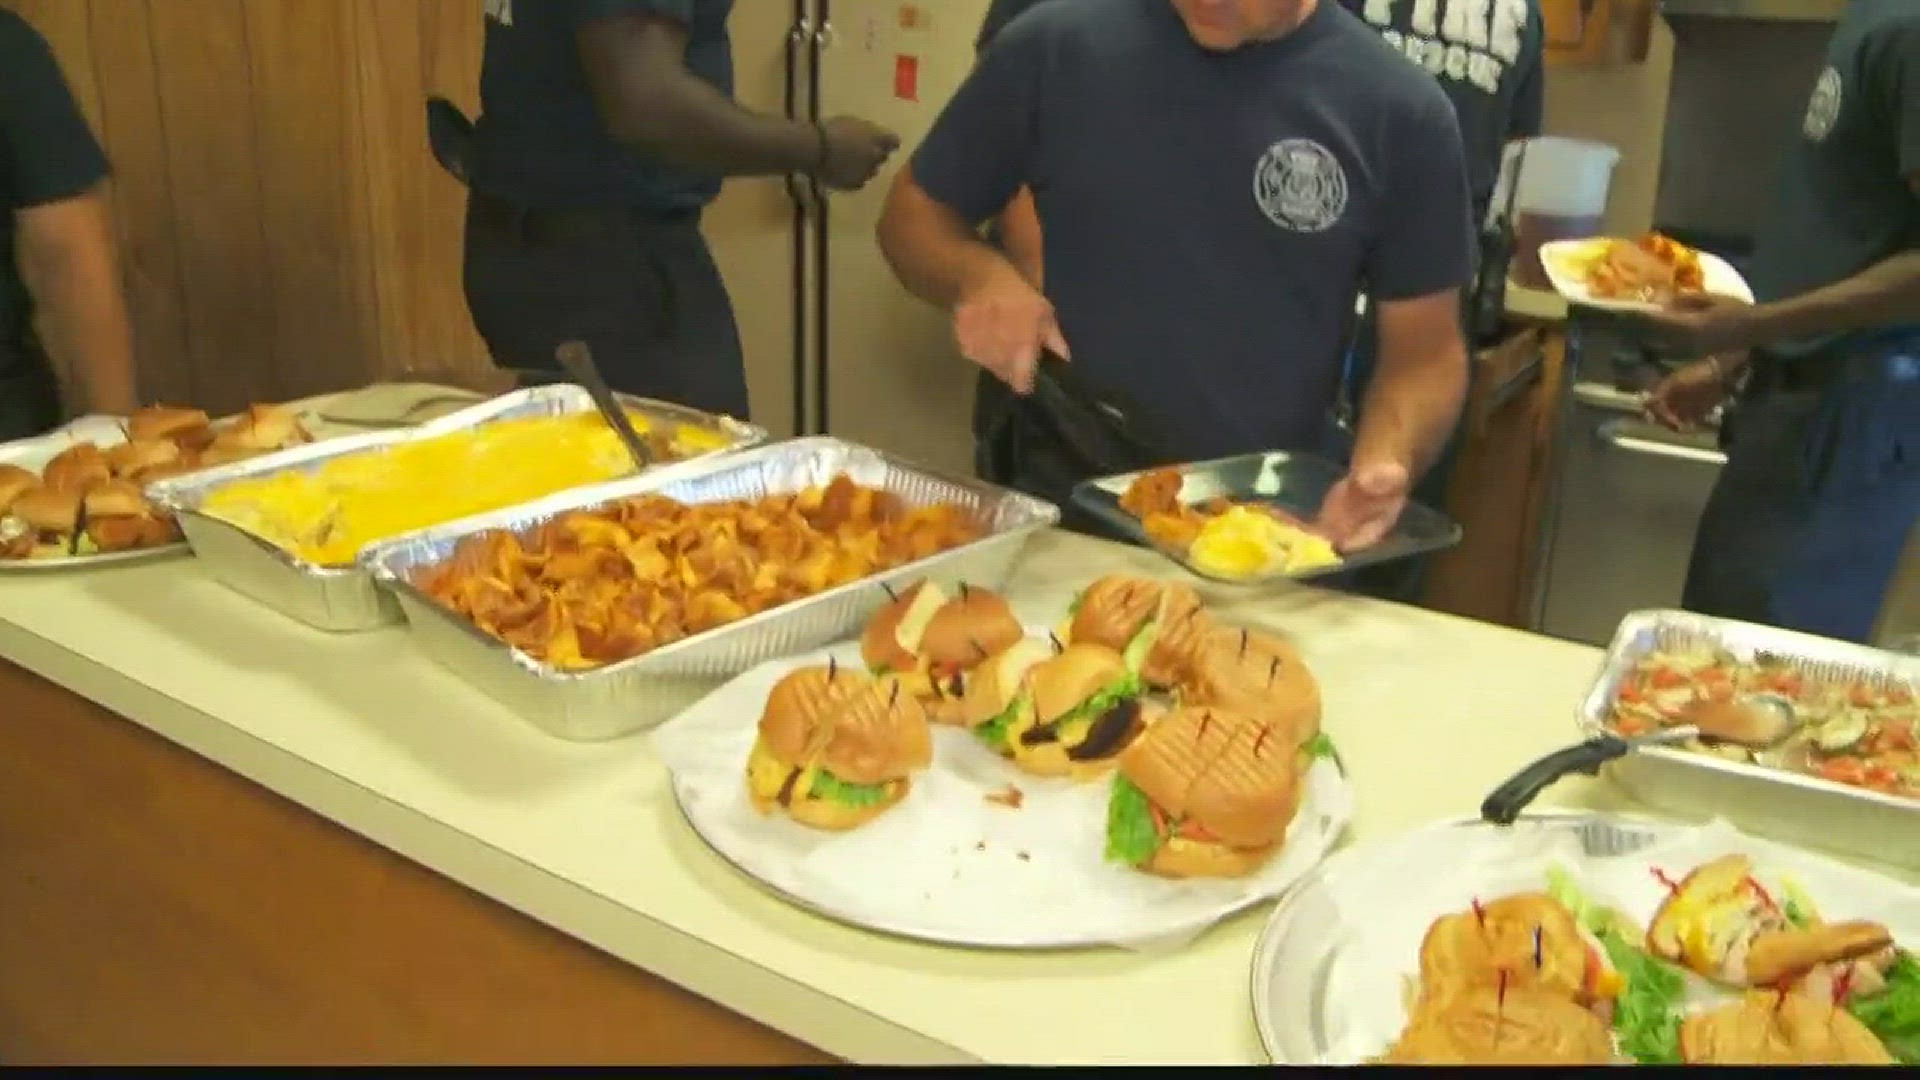 News 19's Ashley Izbicki continues our summer tour of Random Acts of Kindness serving some hungry firemen who often do not get a chance to stop and just eat.